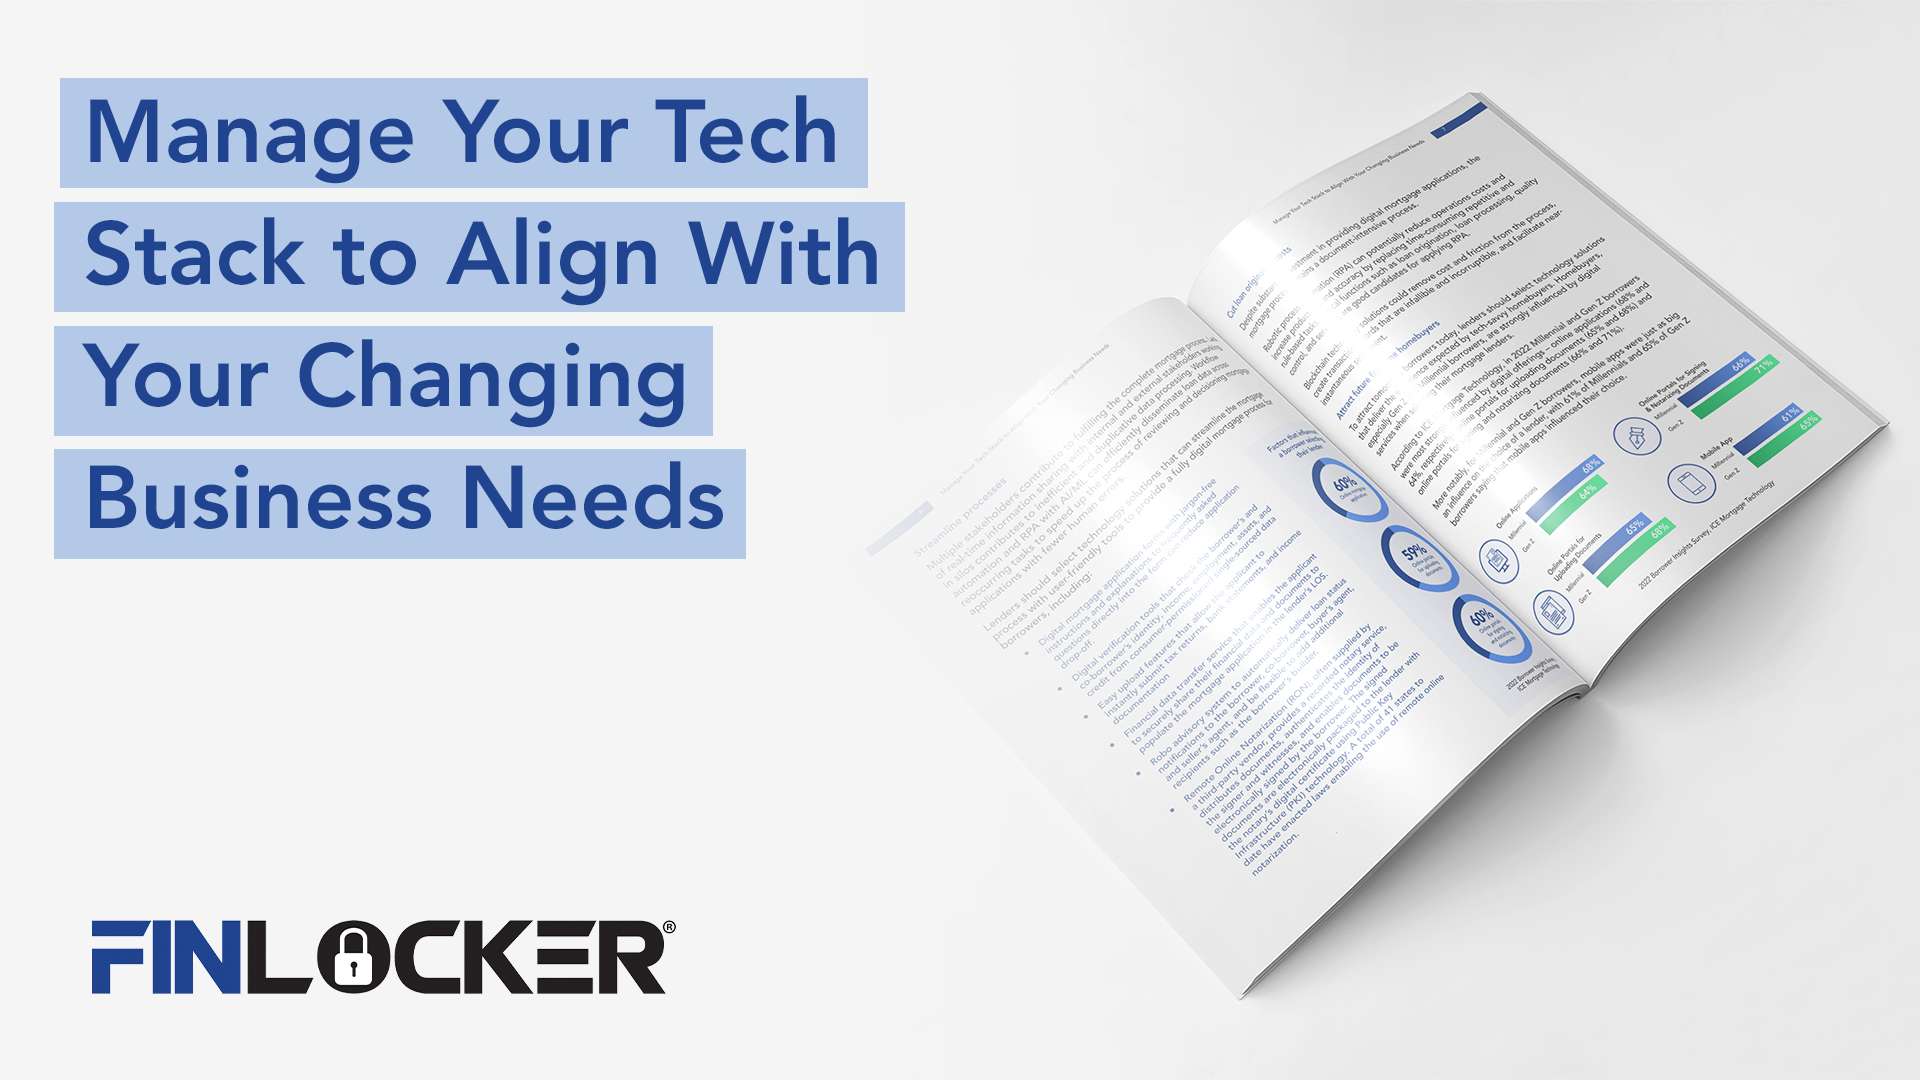 Download Manage Your Tech Stack to Align With Your Changing Business Needs